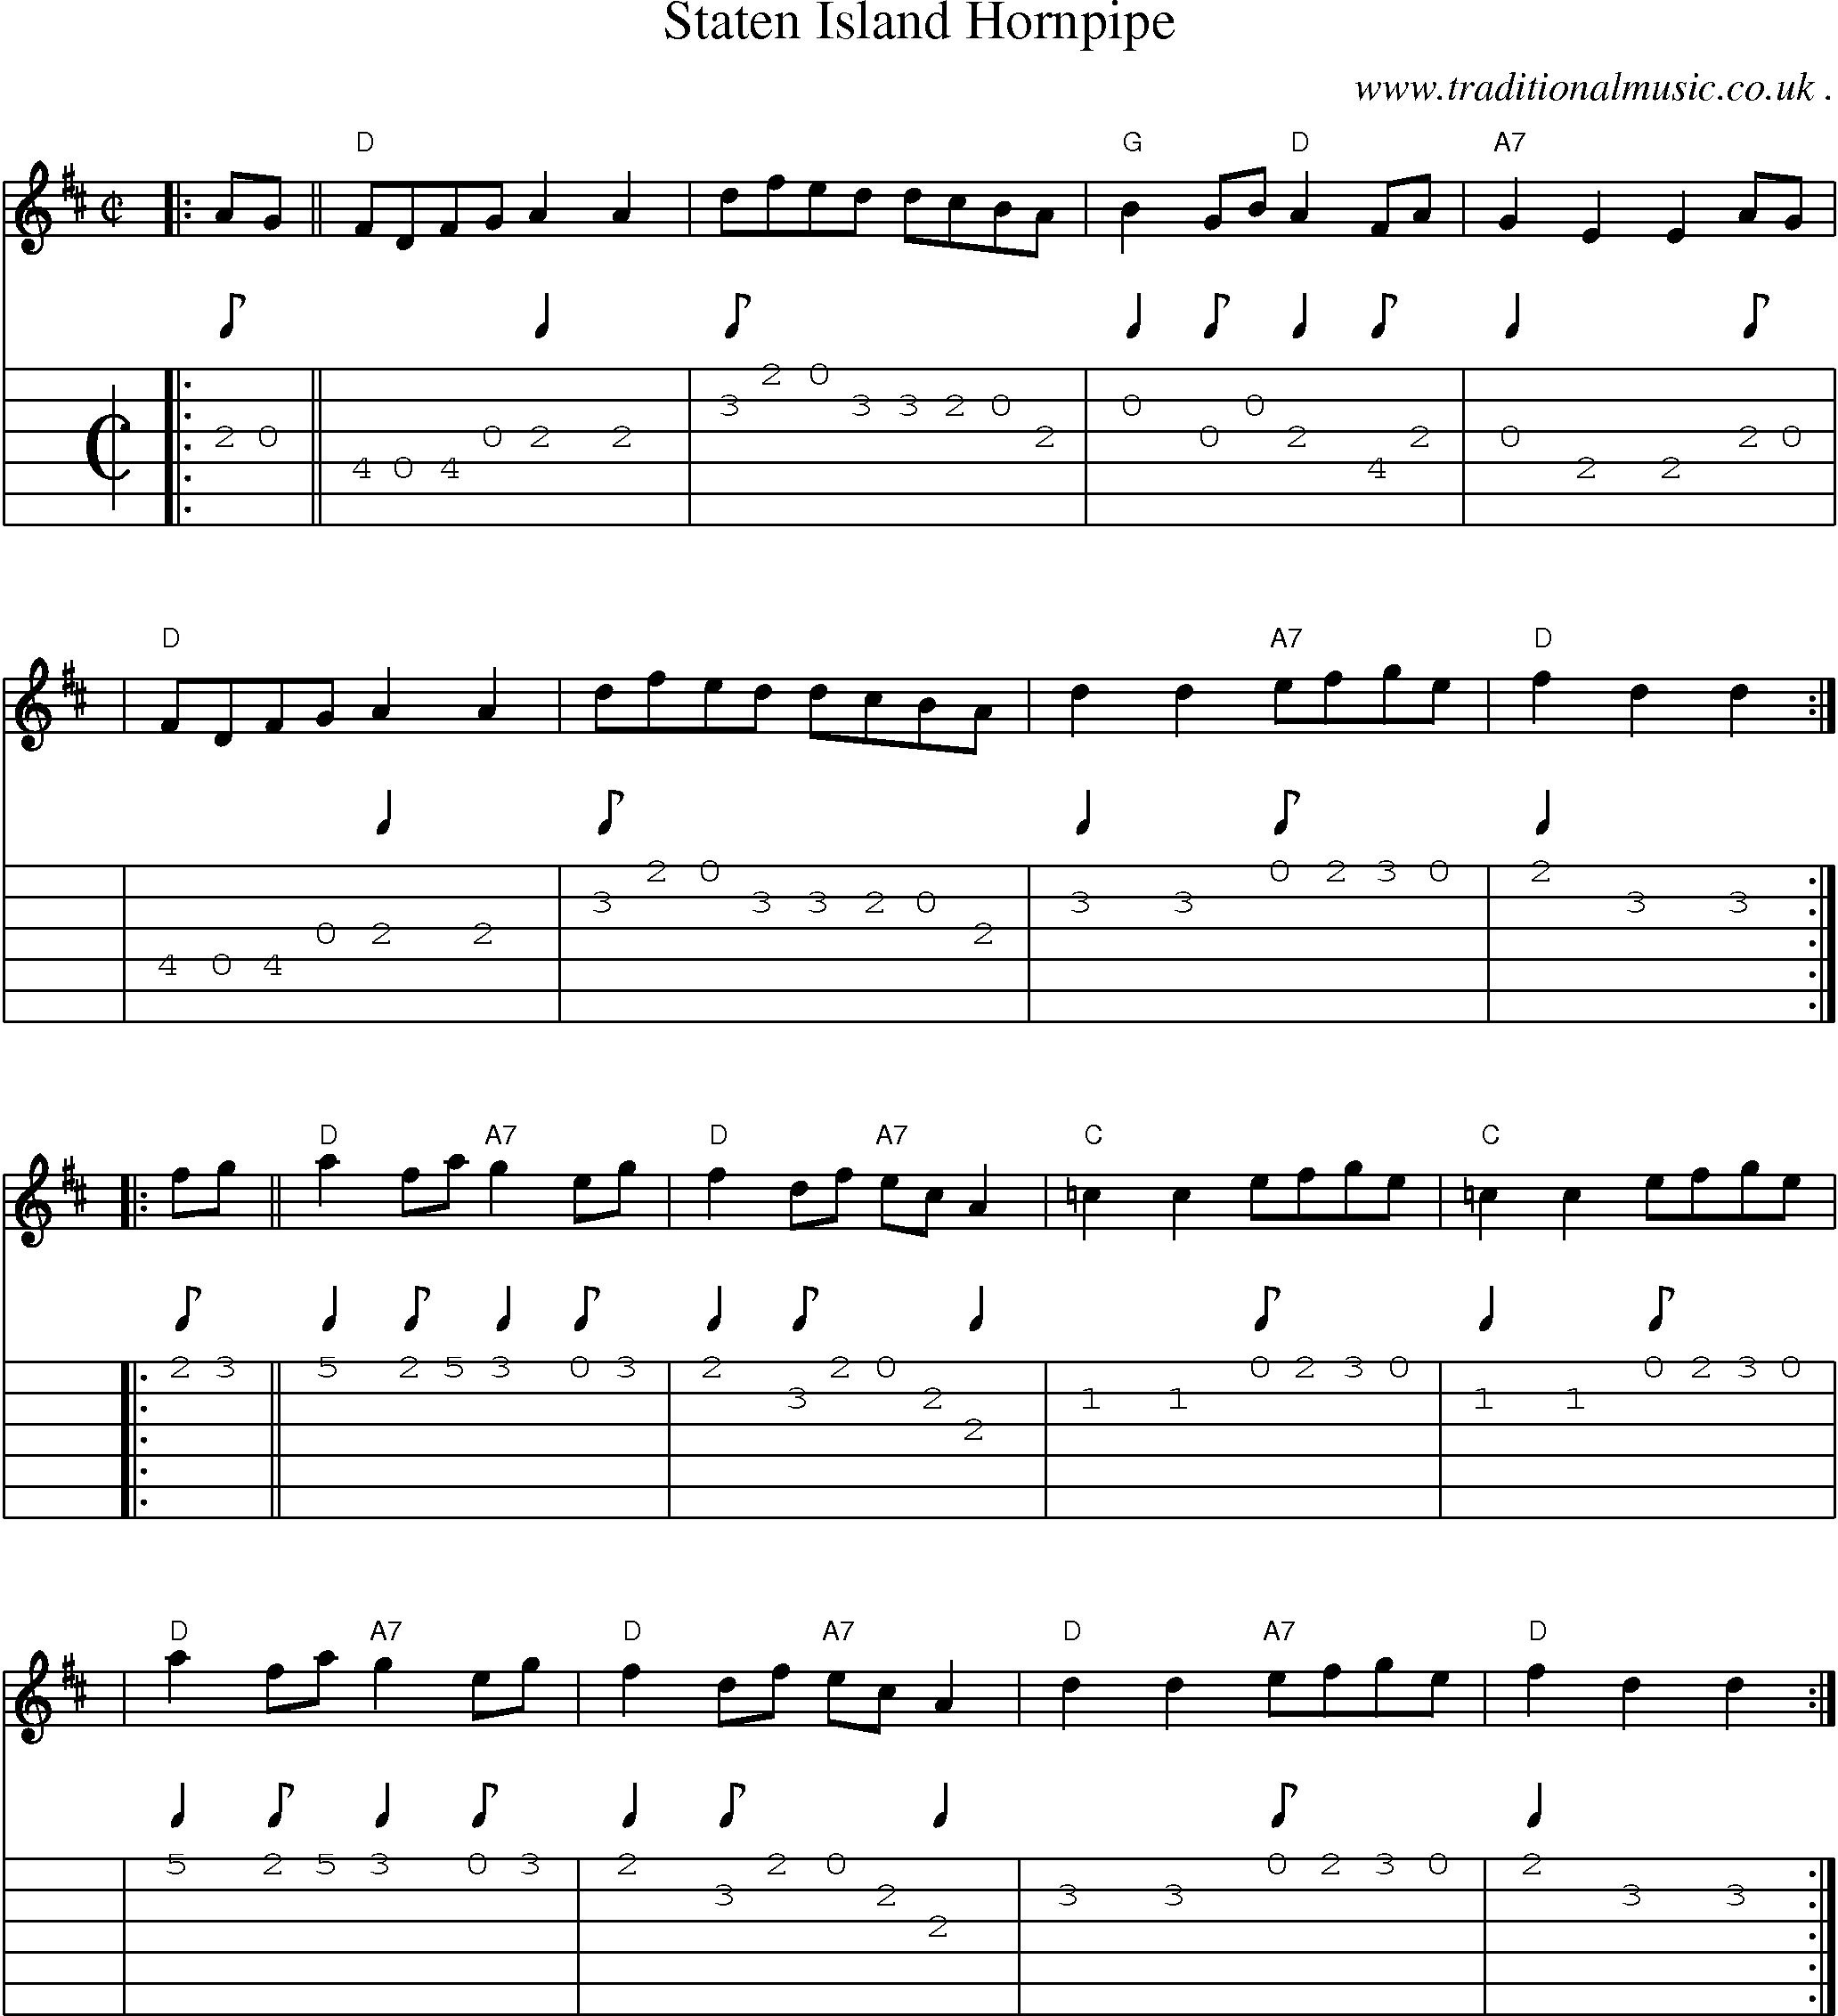 Sheet-music  score, Chords and Guitar Tabs for Staten Island Hornpipe